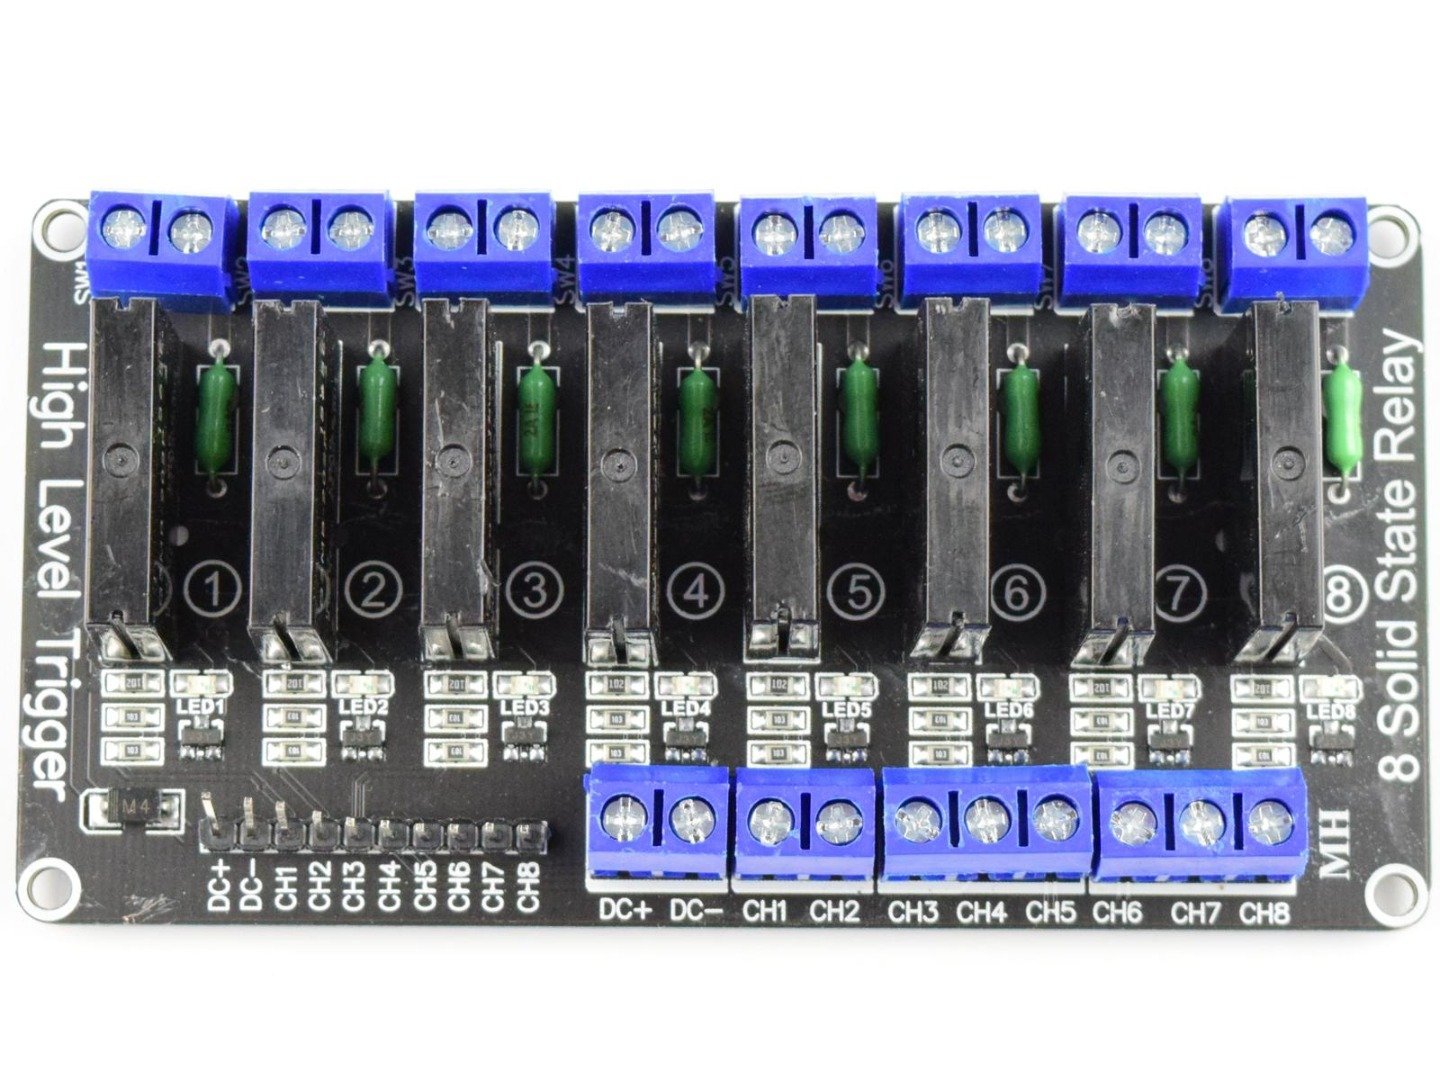 8 Channel SSR Solid State Relay Module 250V 2A – for 3.3V and 5V control voltage 7